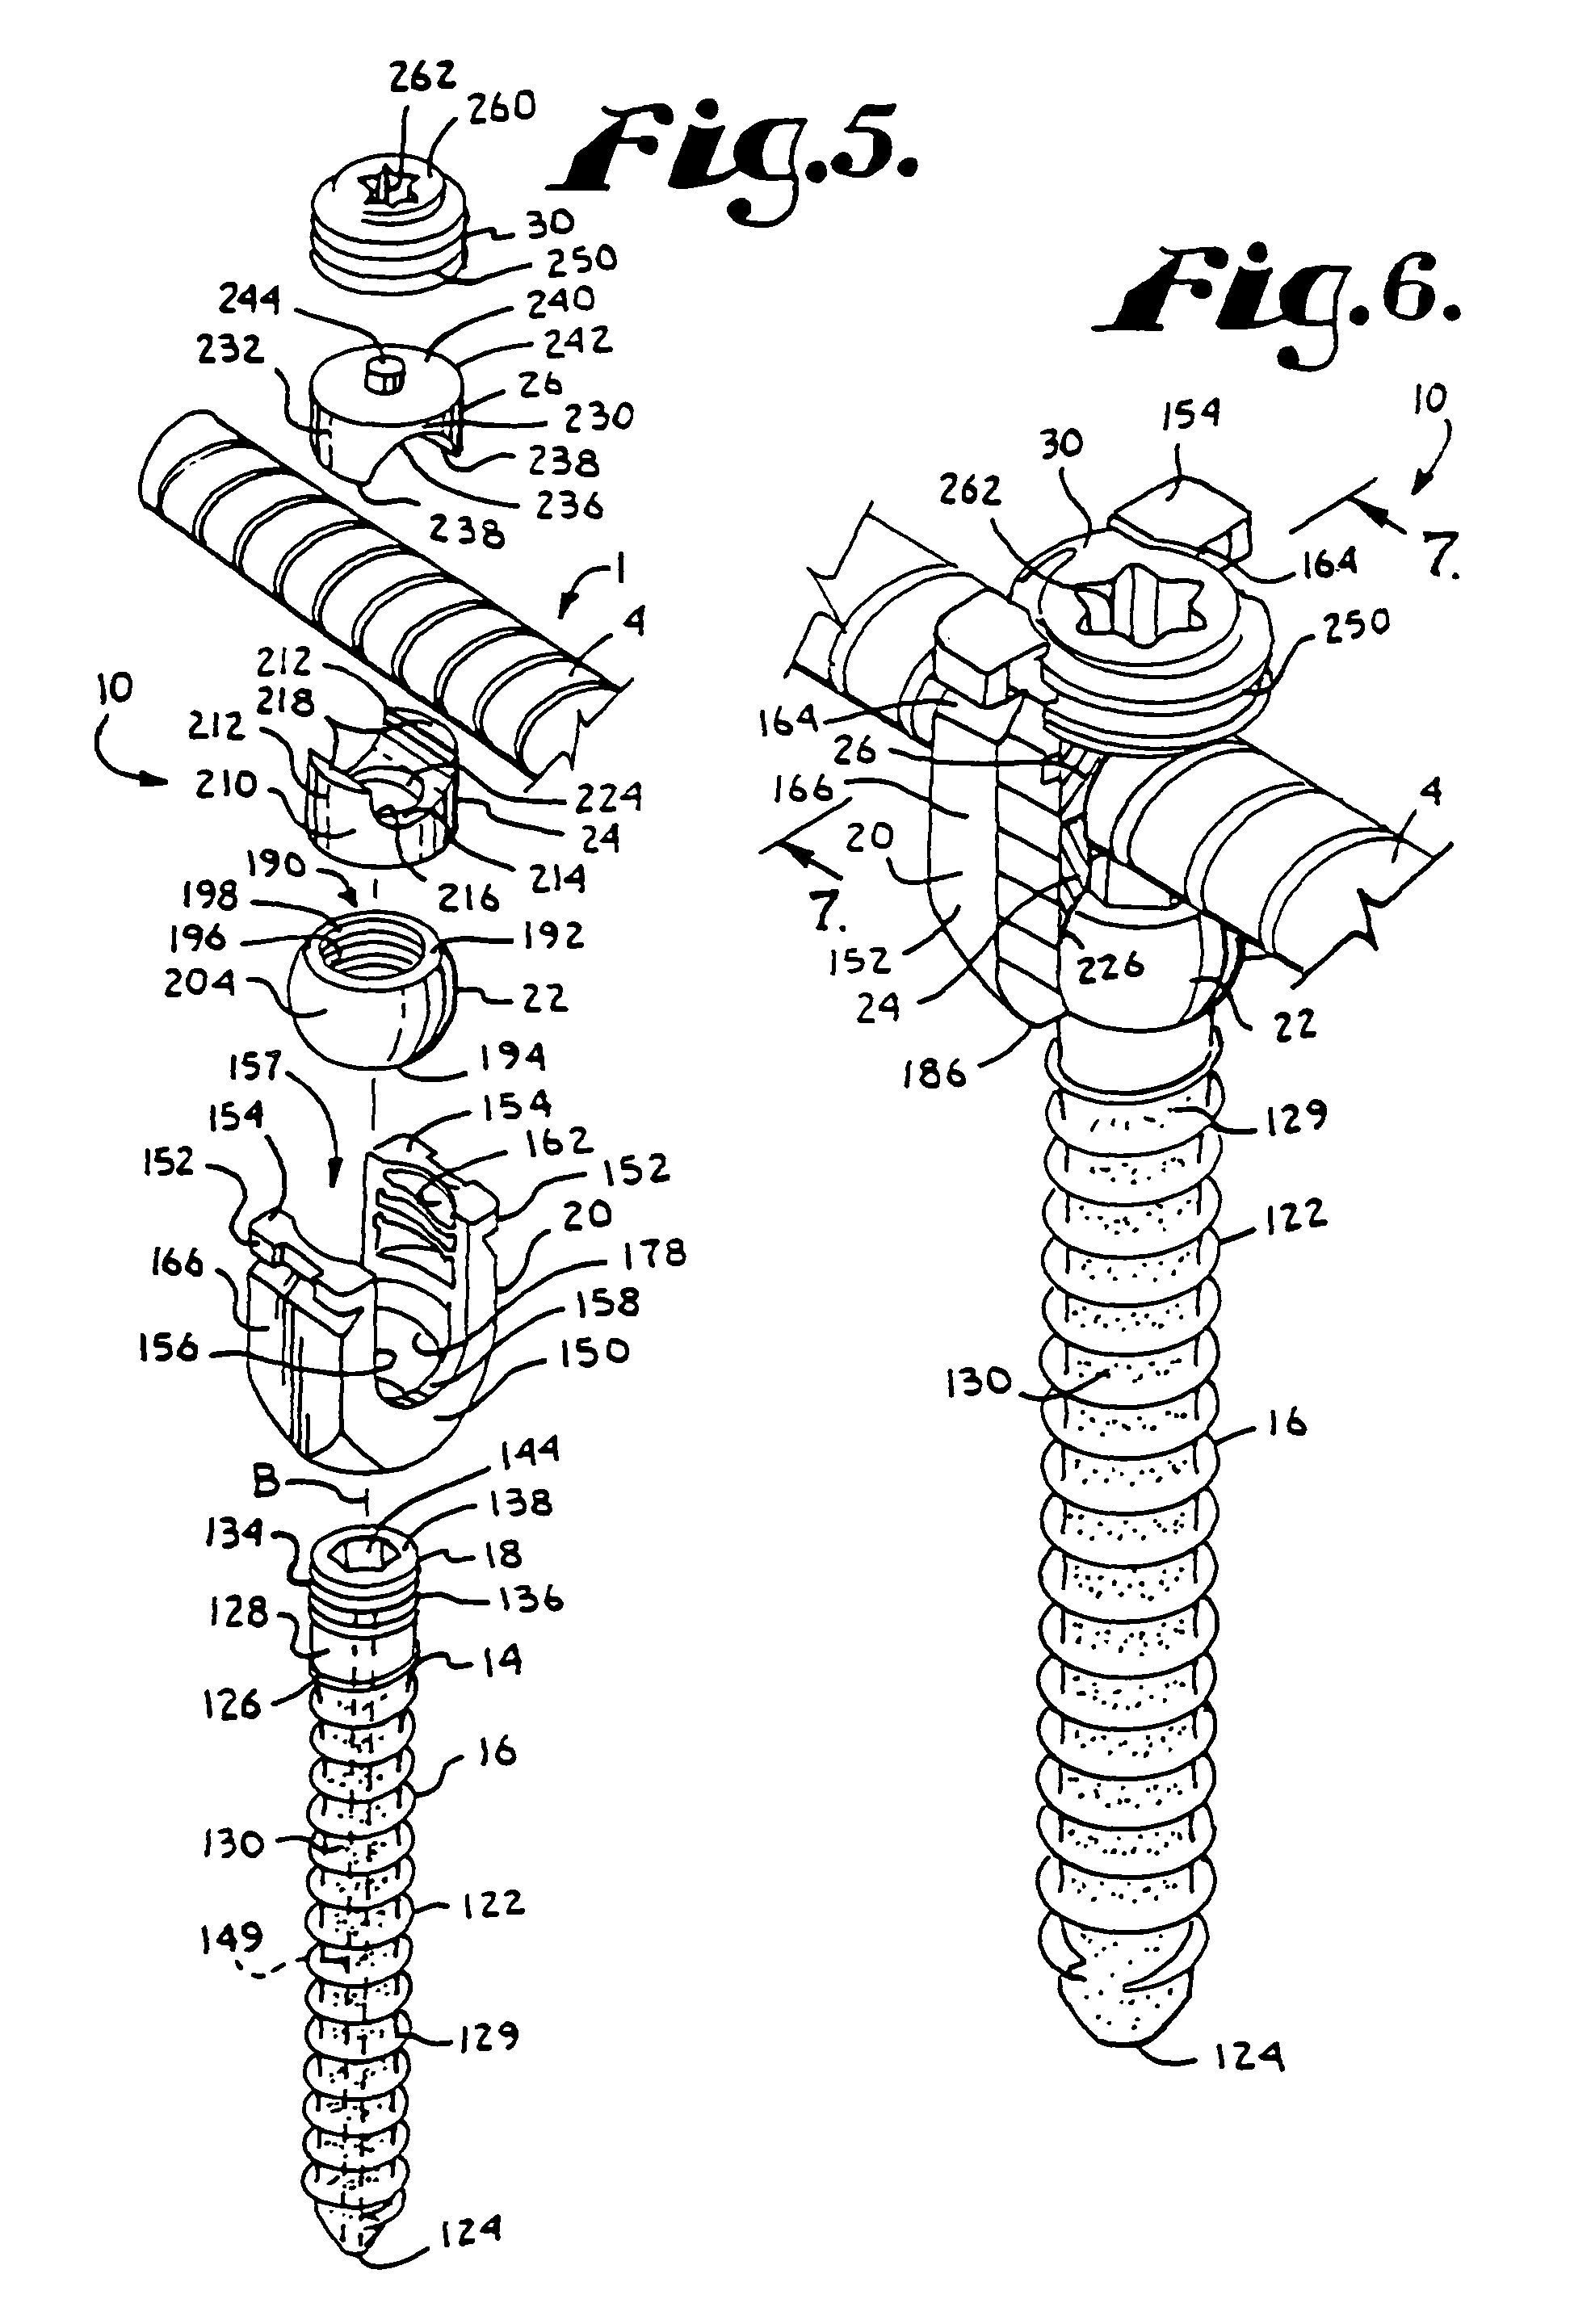 Dynamic fixation assemblies with inner core and outer coil-like member